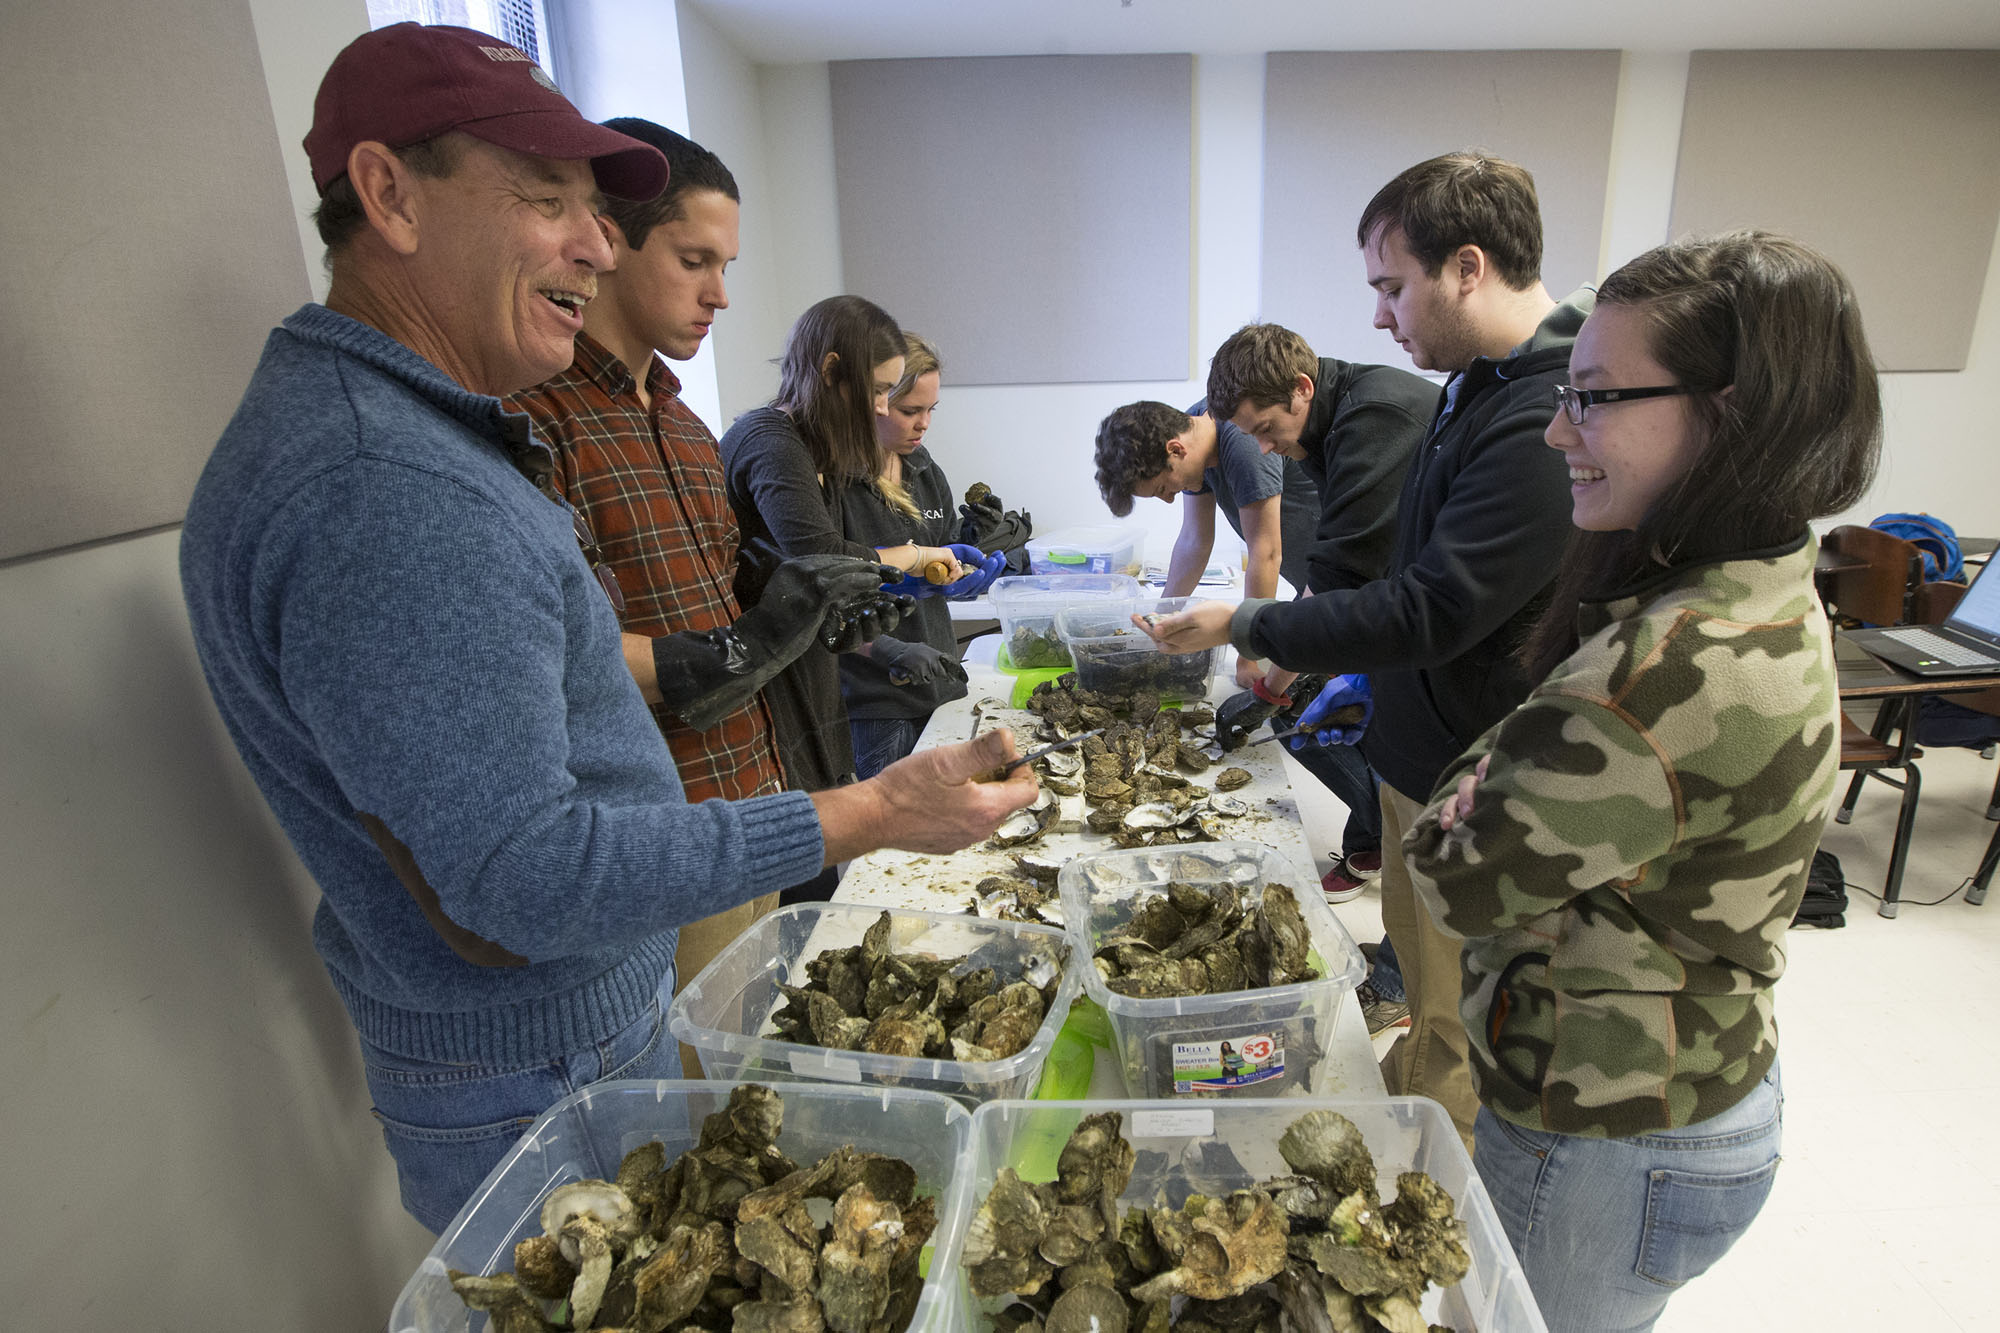 Waterman Philip Shahan discusses oysters with student Kristen Eppard.